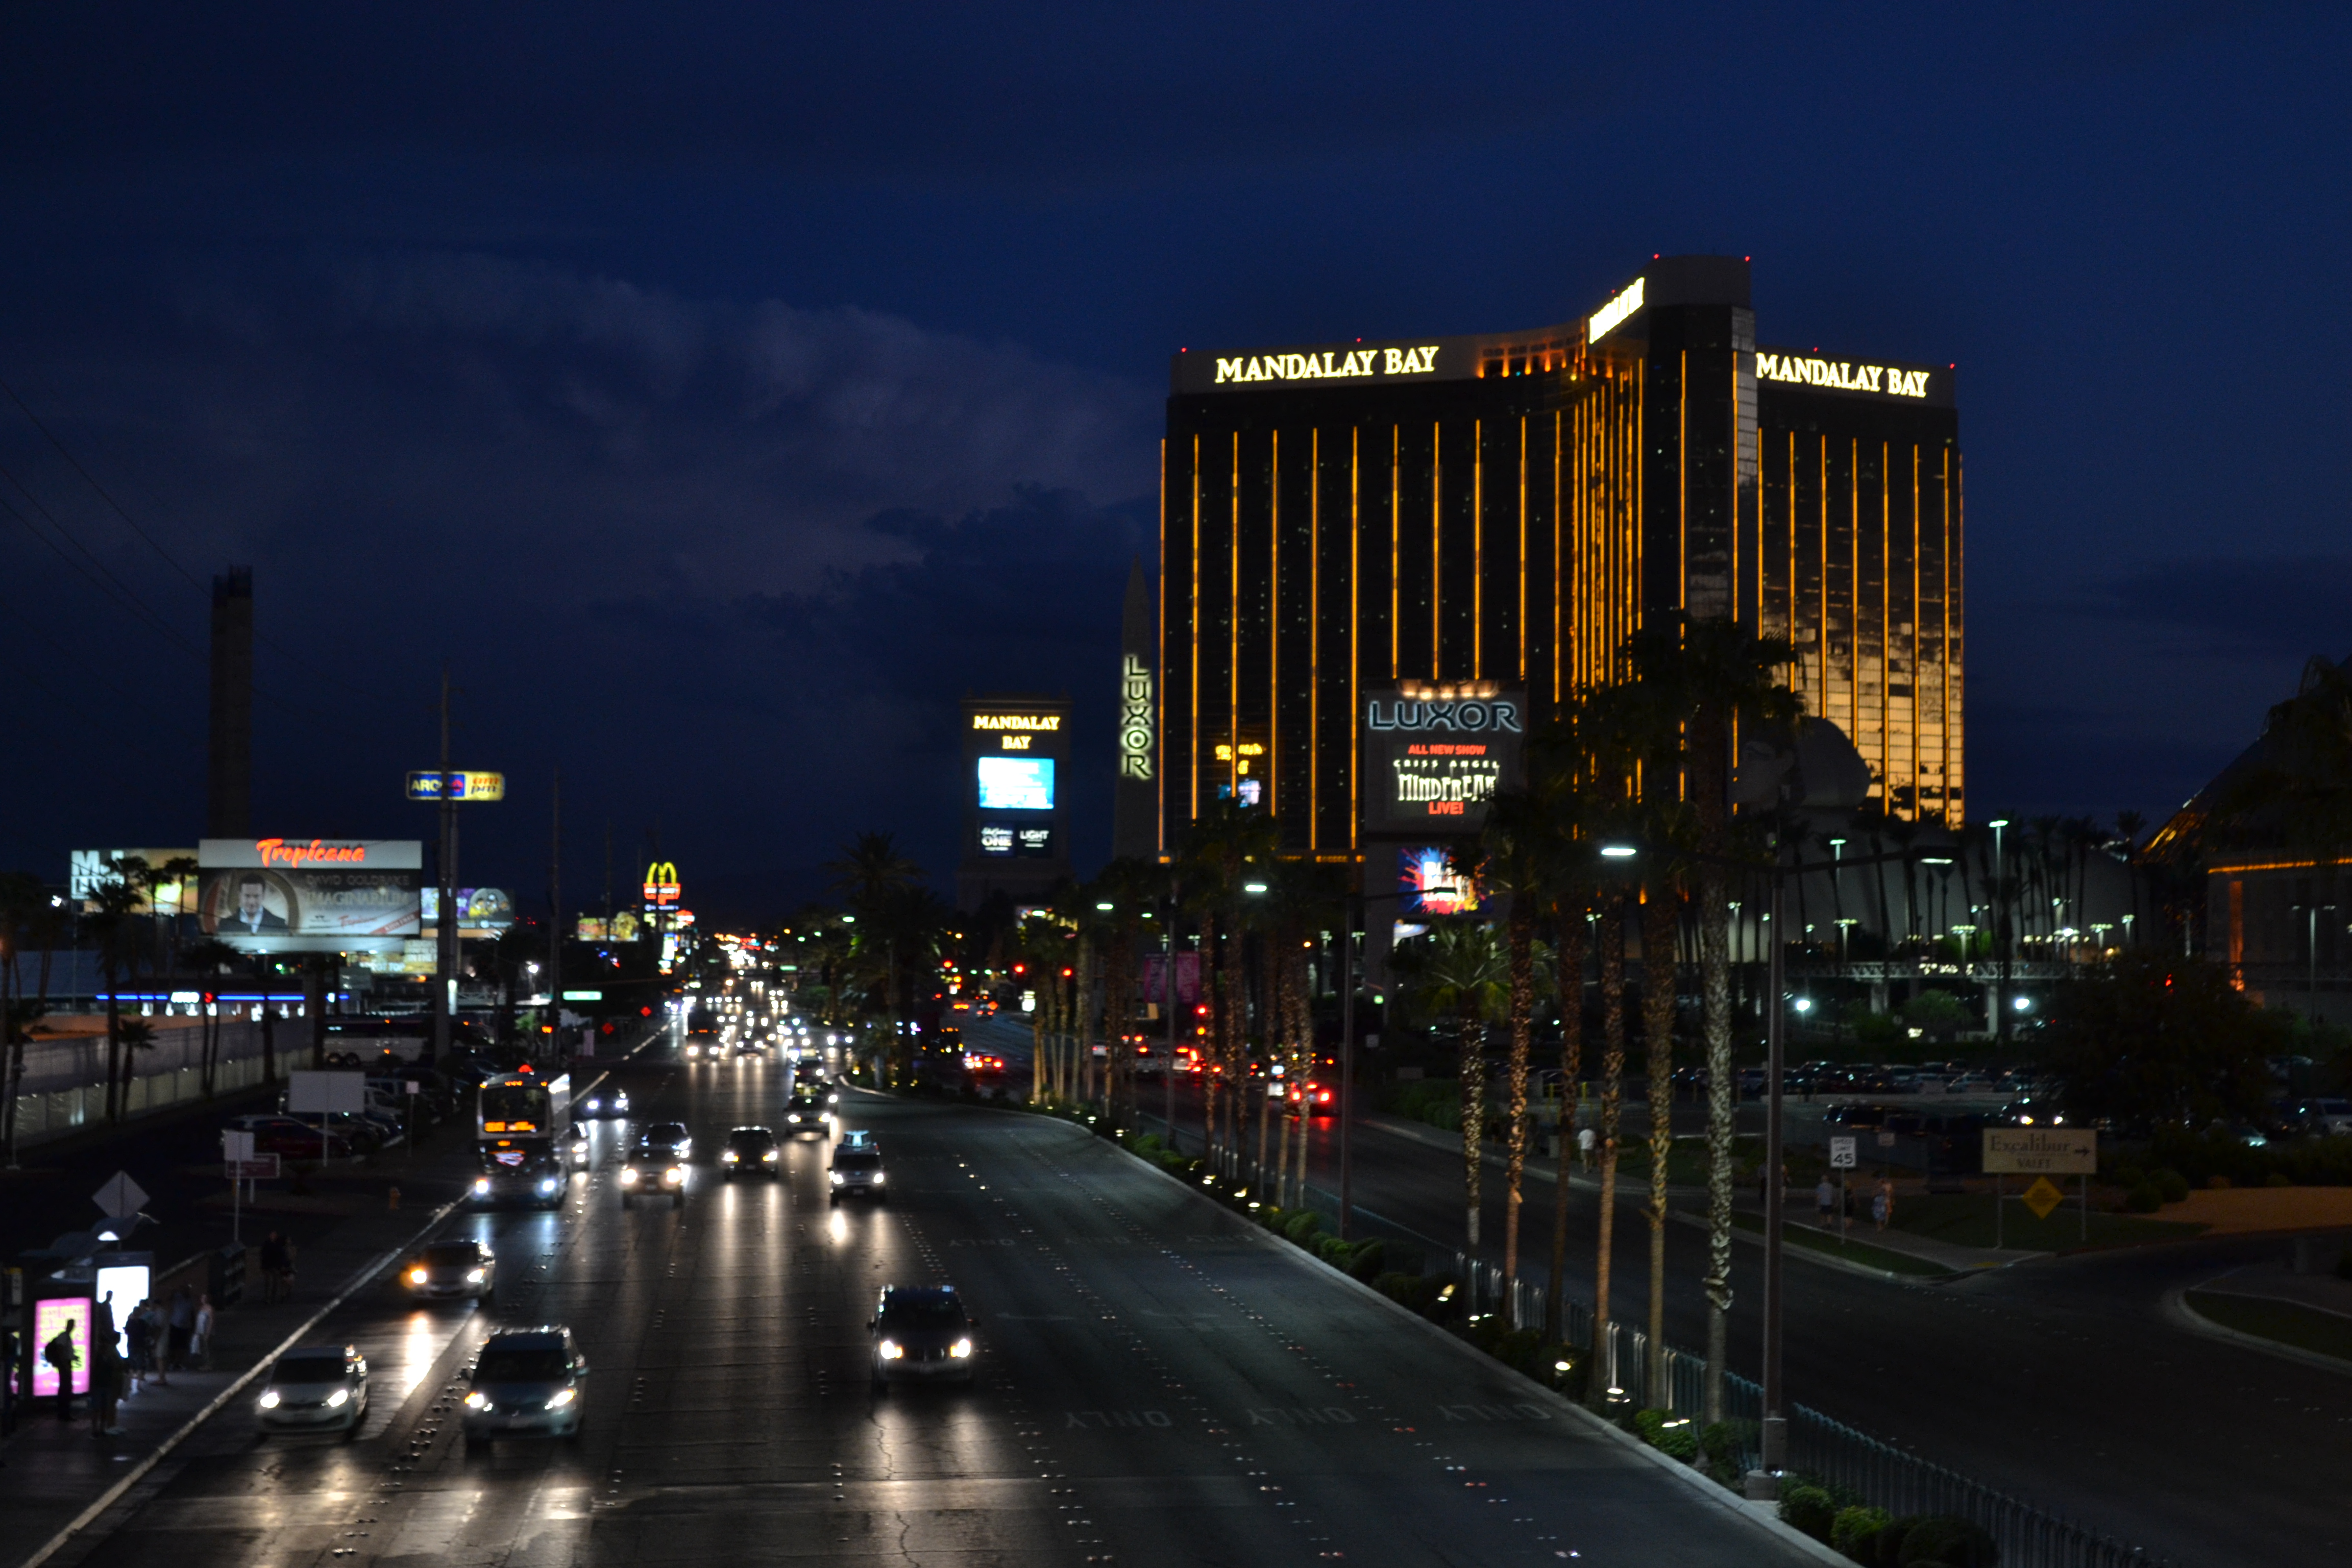 Mandaley Bay at Night | 72 Hours in Vegas | Solo Travel in Las Vegas